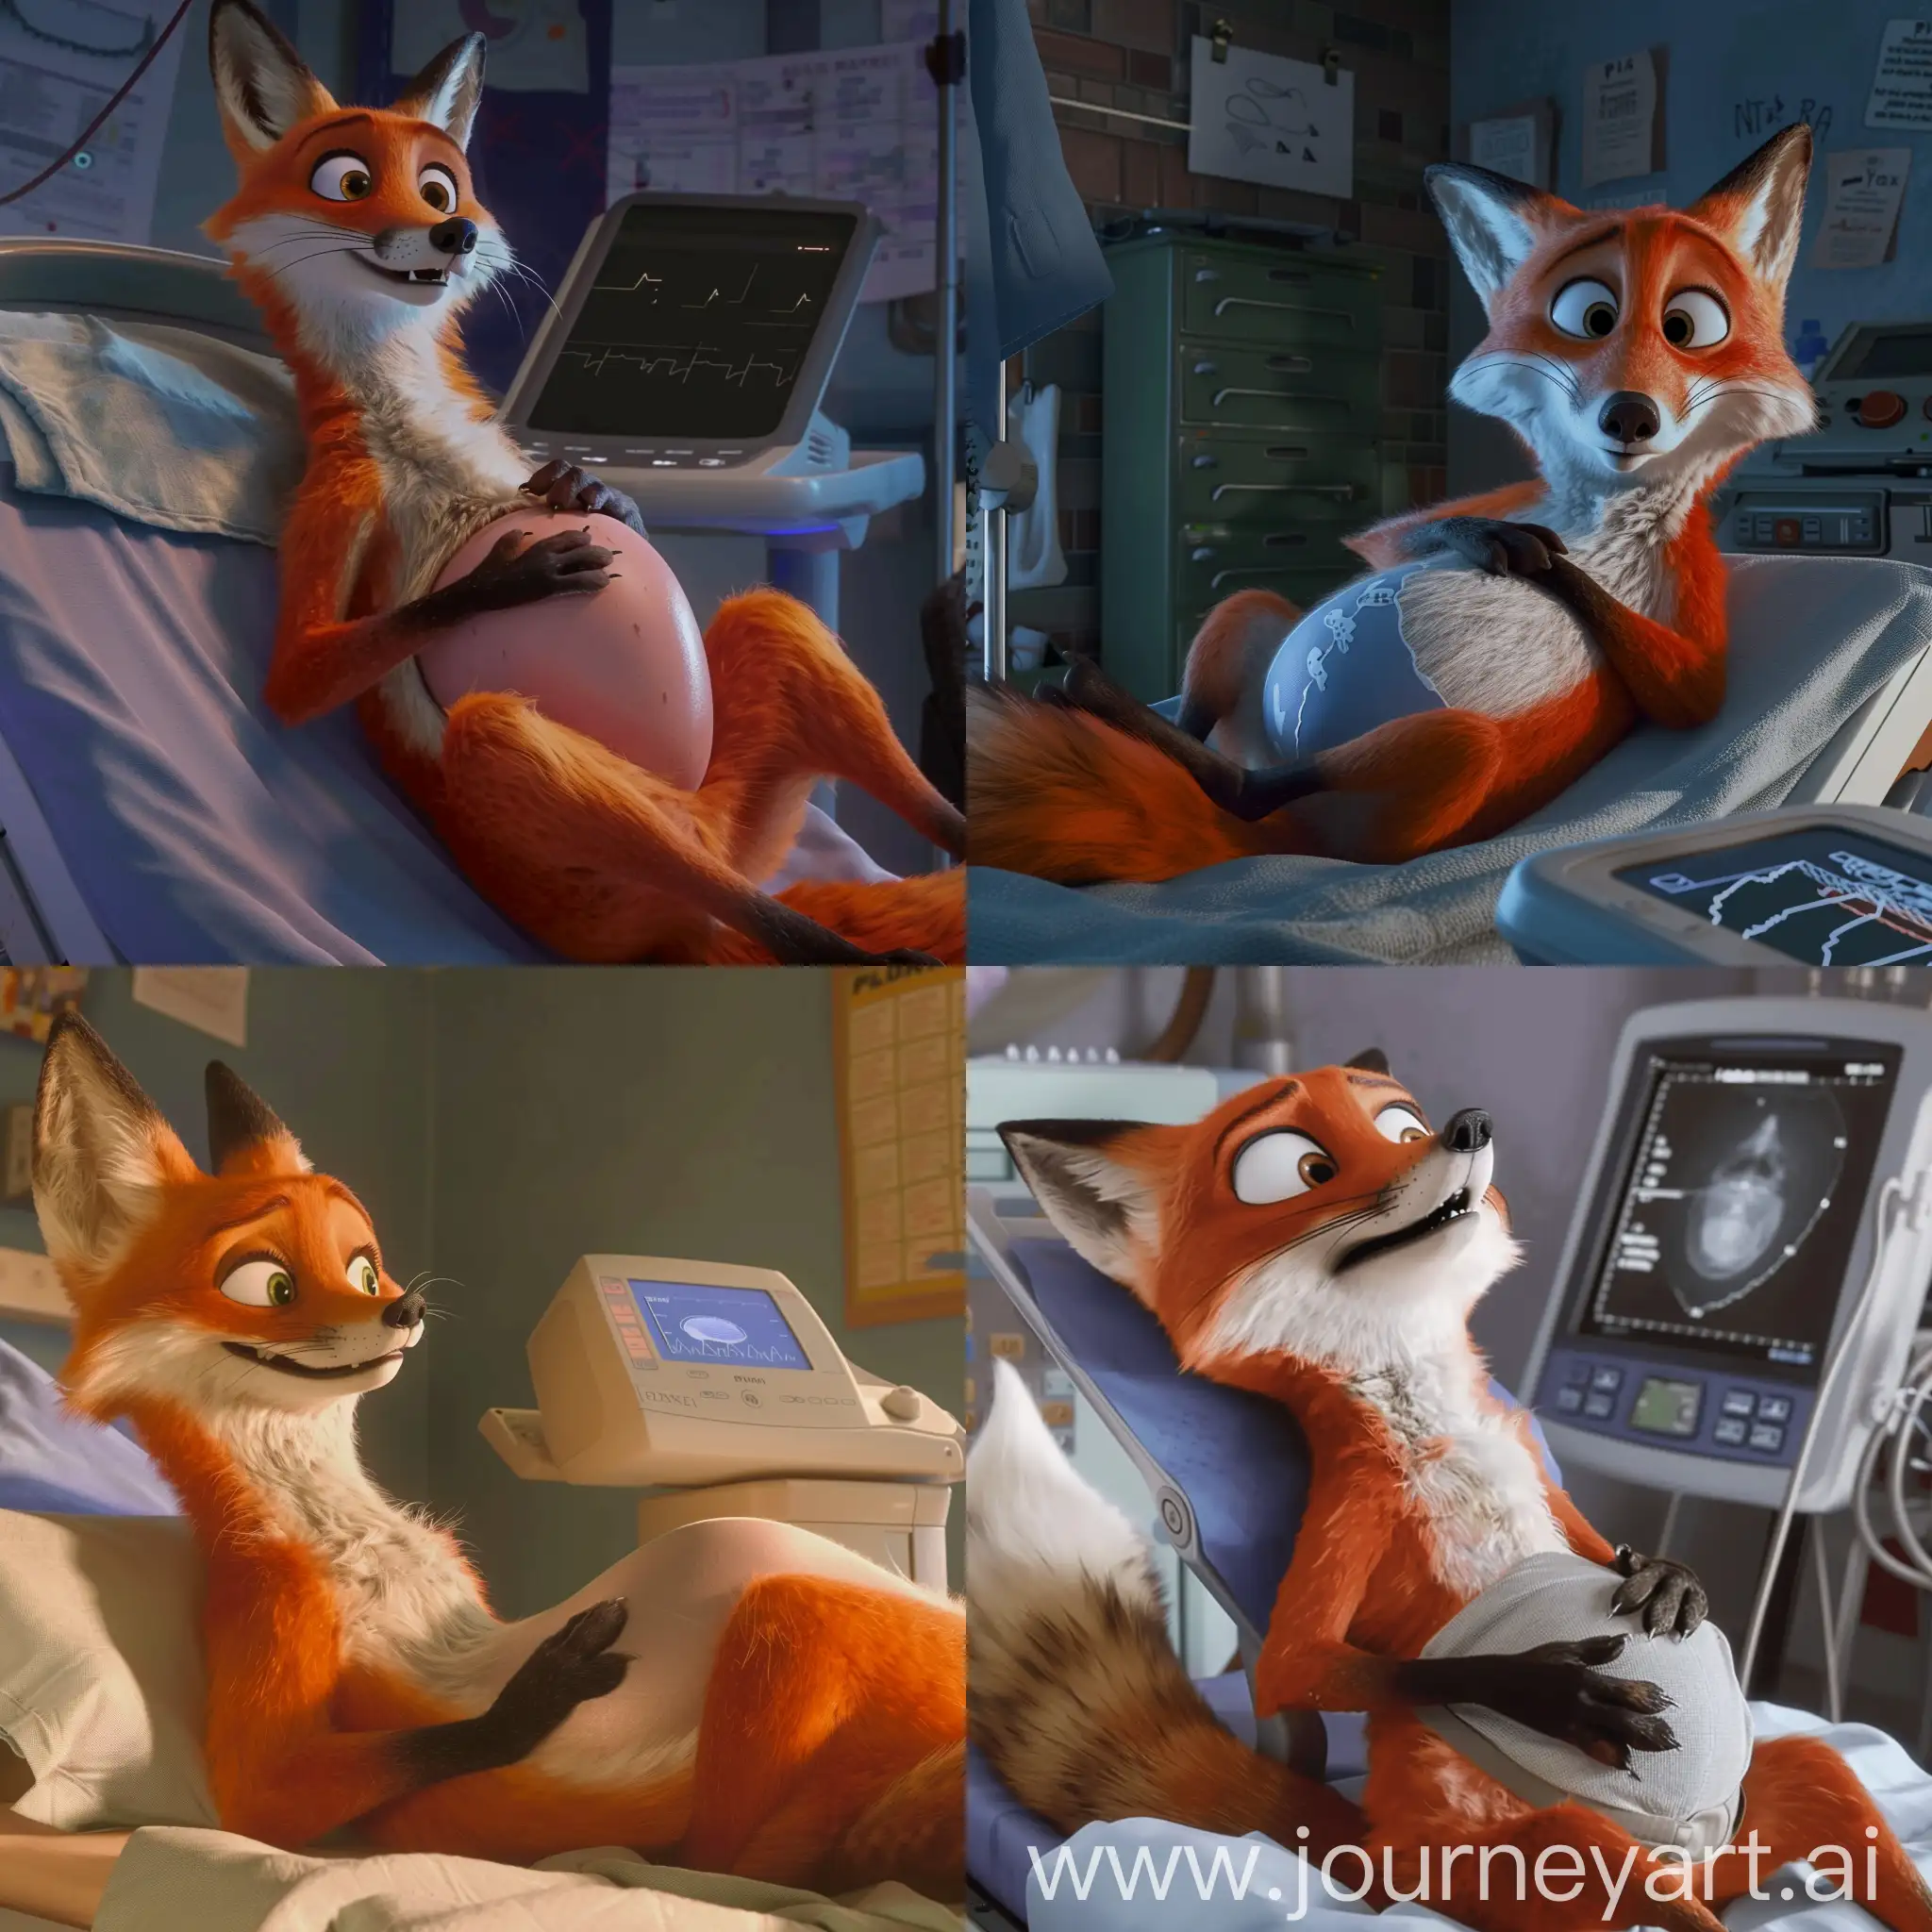 Anxious-Pregnancy-Pixar-Animation-Scene-with-a-Fox-Getting-an-Ultrasound